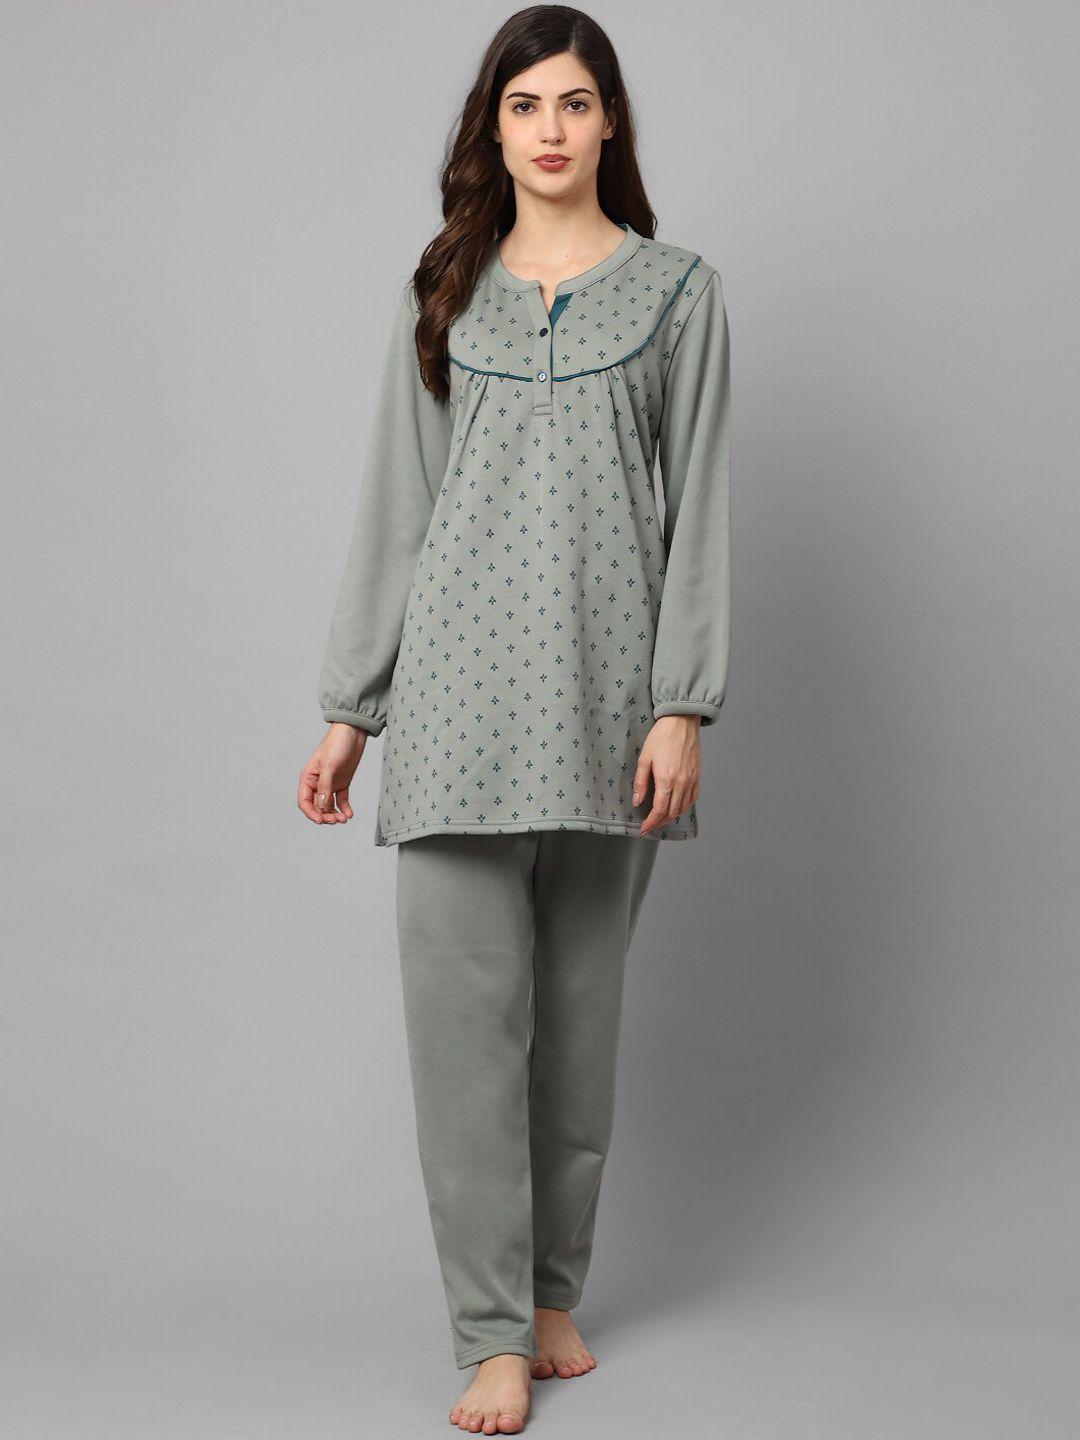 kanvin-women-olive-green-&-blue-printed-night-suit